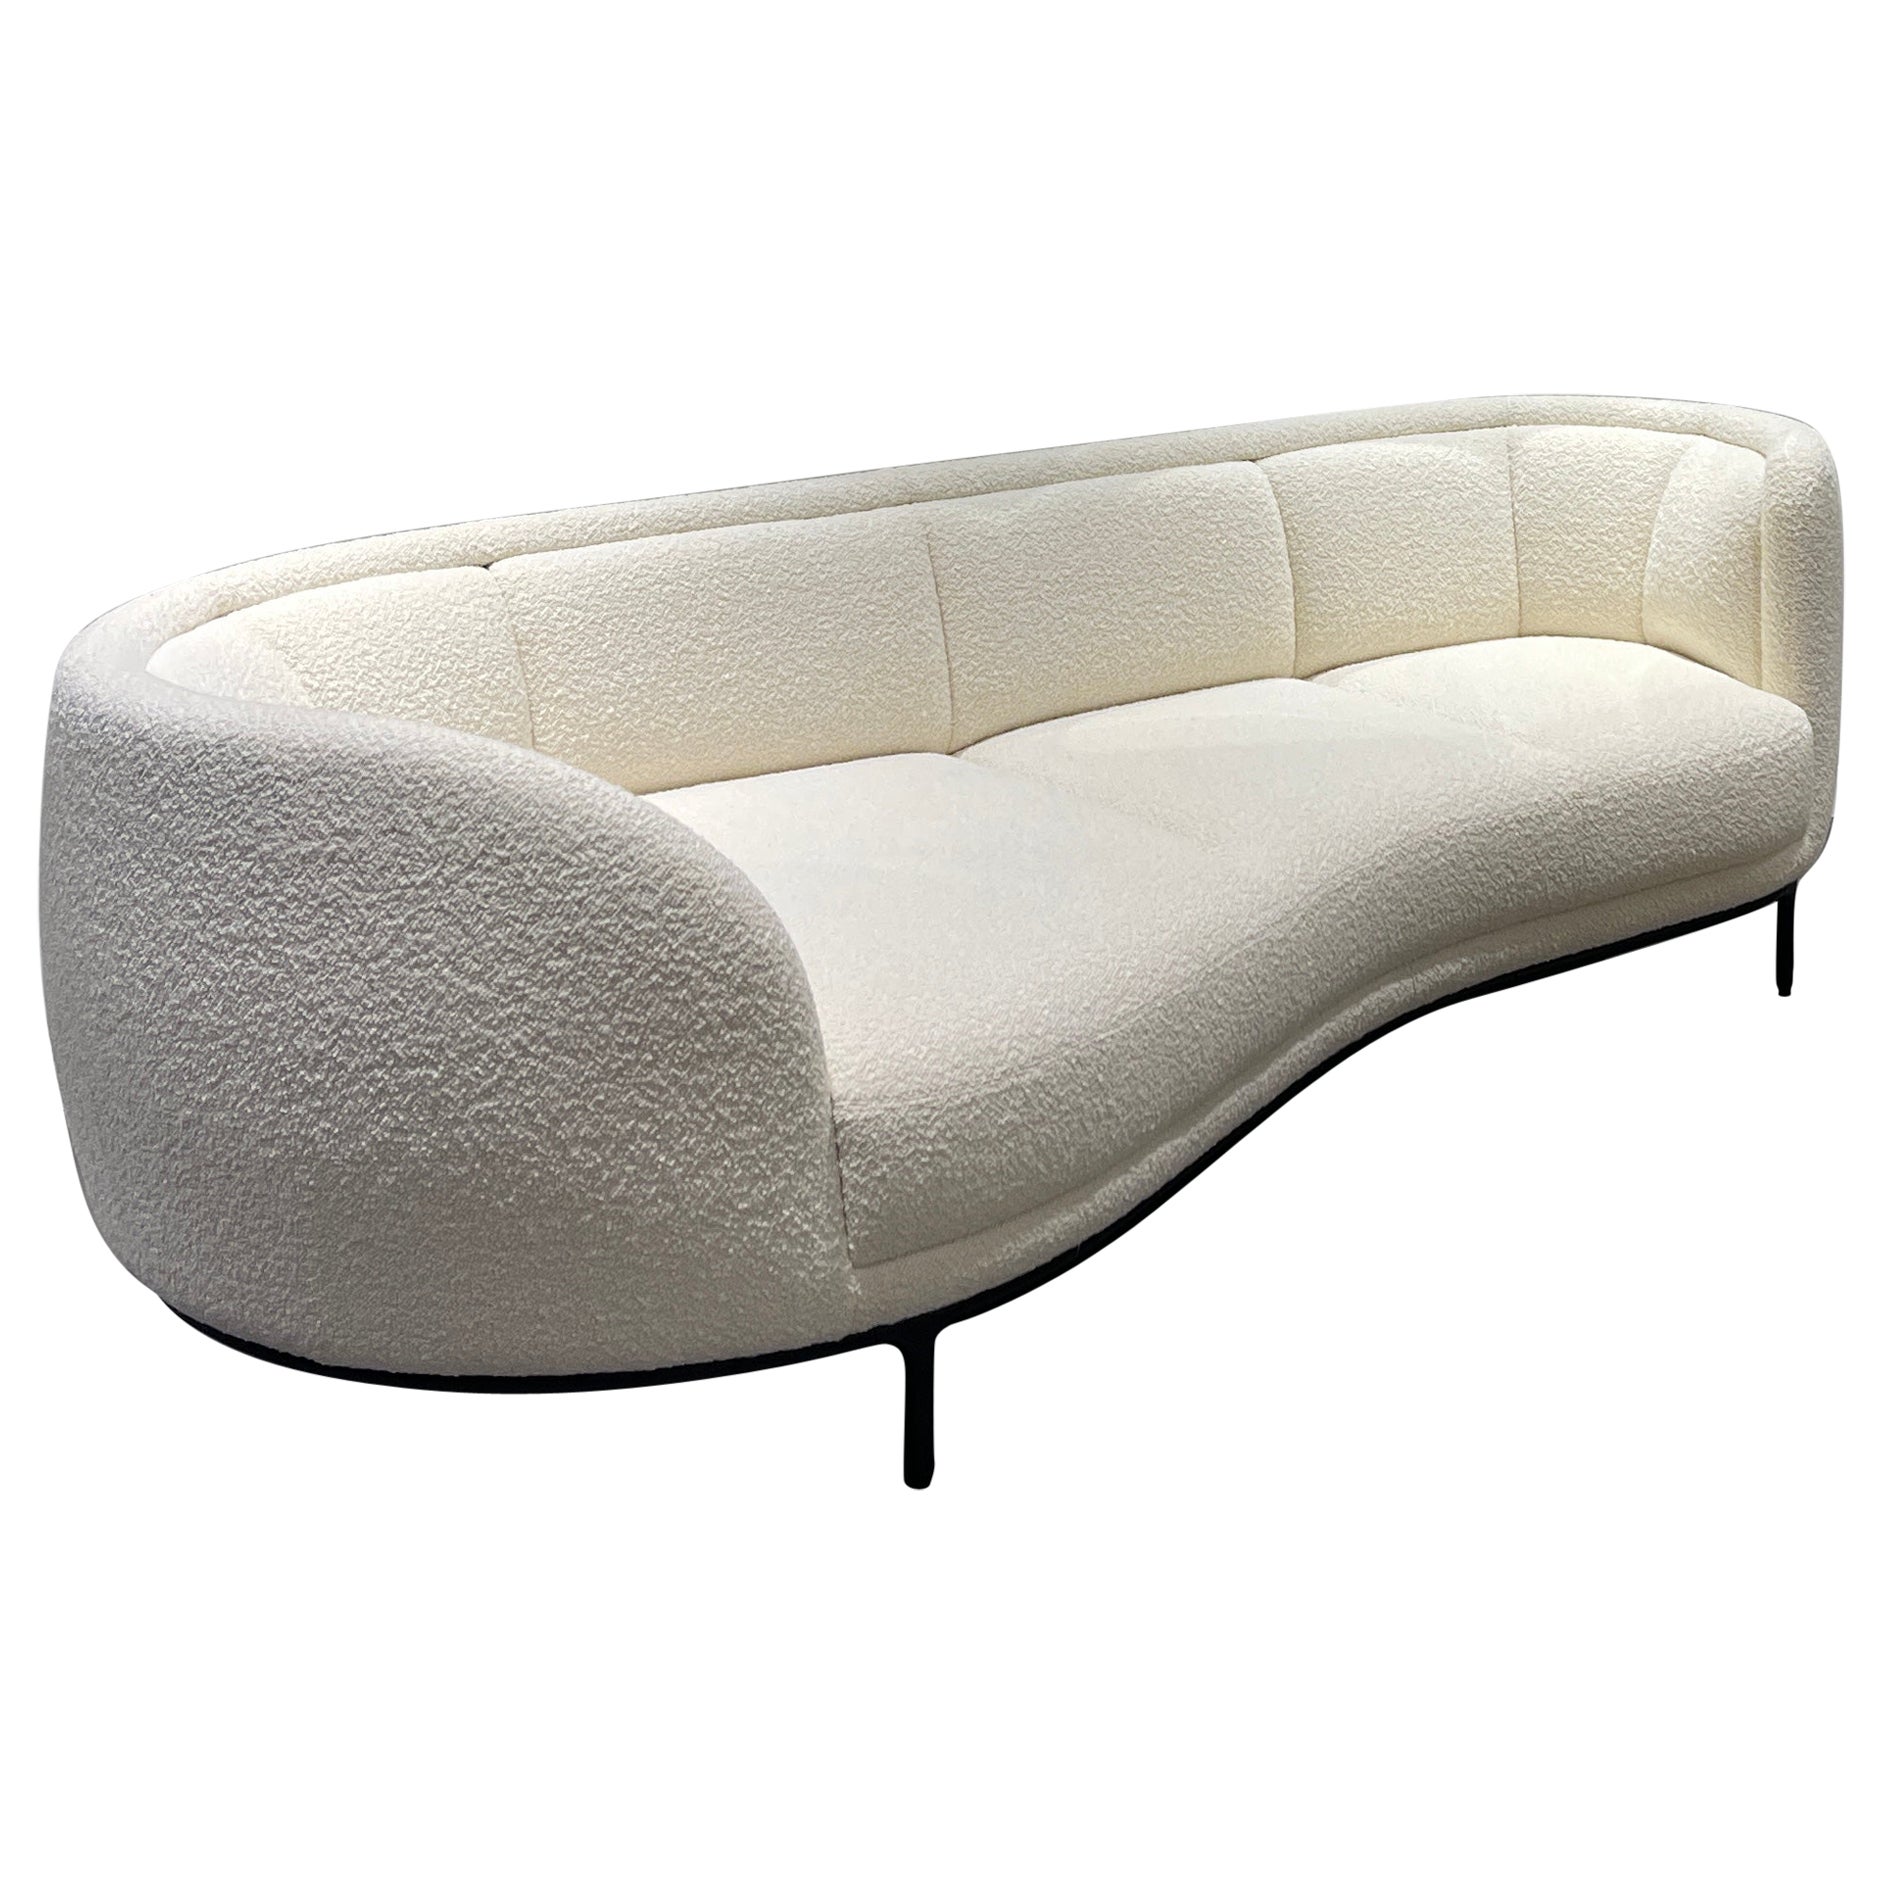 Wittmann Vuelta Lounge Sofa by Jaime Hayon in STOCK For Sale at 1stDibs